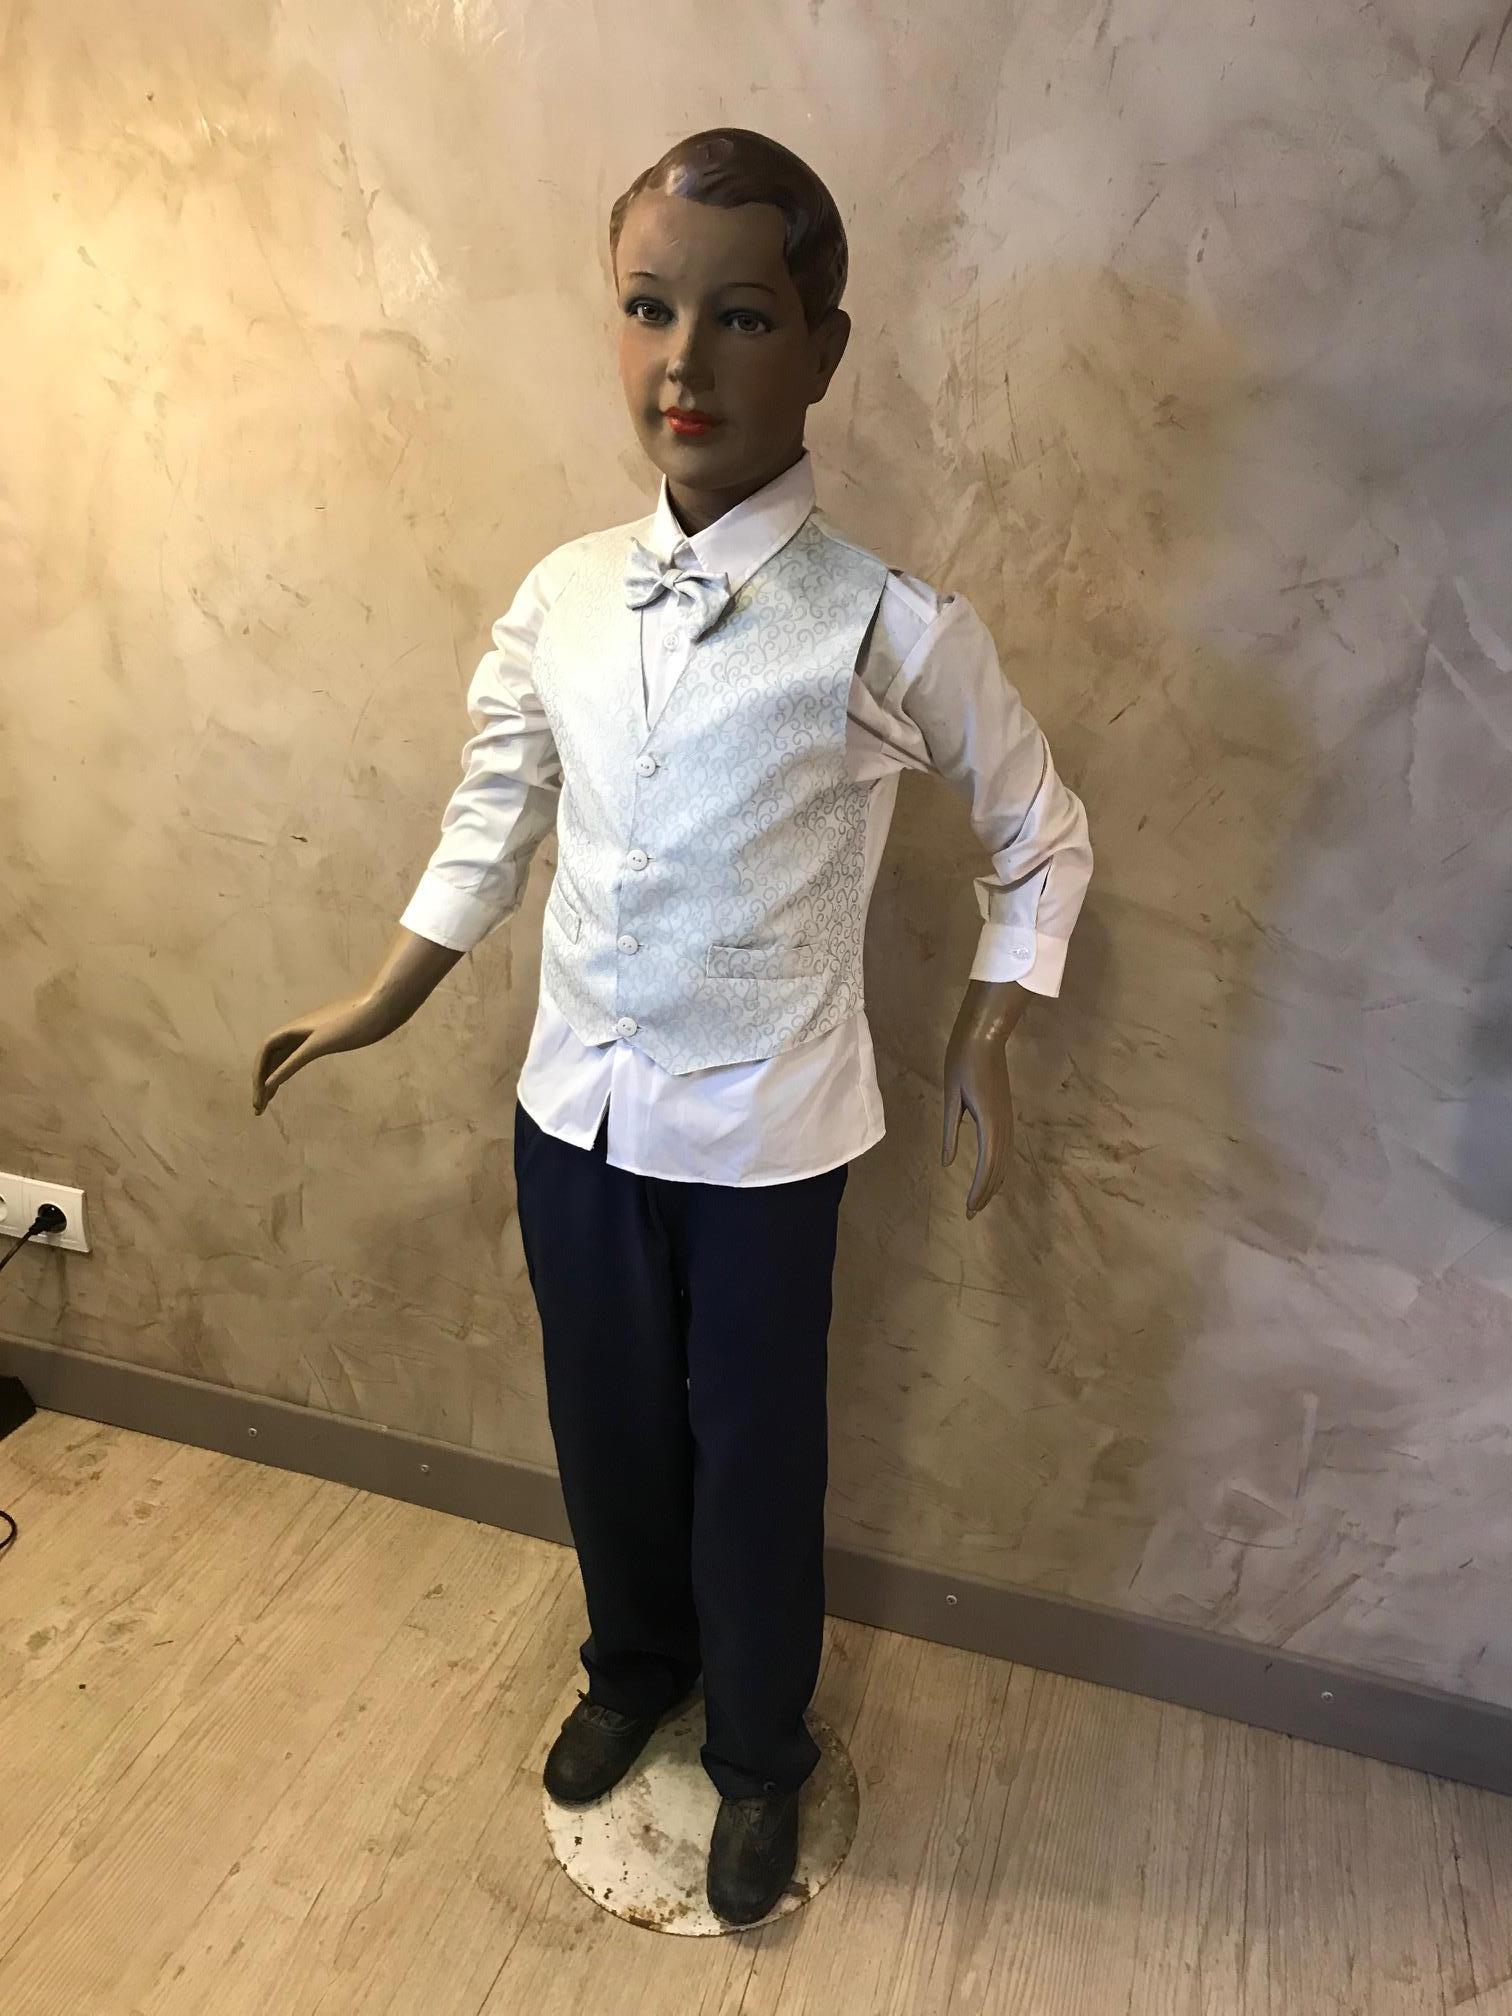 Very nice and rare life size wood and plaster articulated child mannequin from the 1920s.
Clothes for his size. Sulfide eyes.
Very good quality and condition.
Can stand up thanks to a metal base.
Articulated arms.